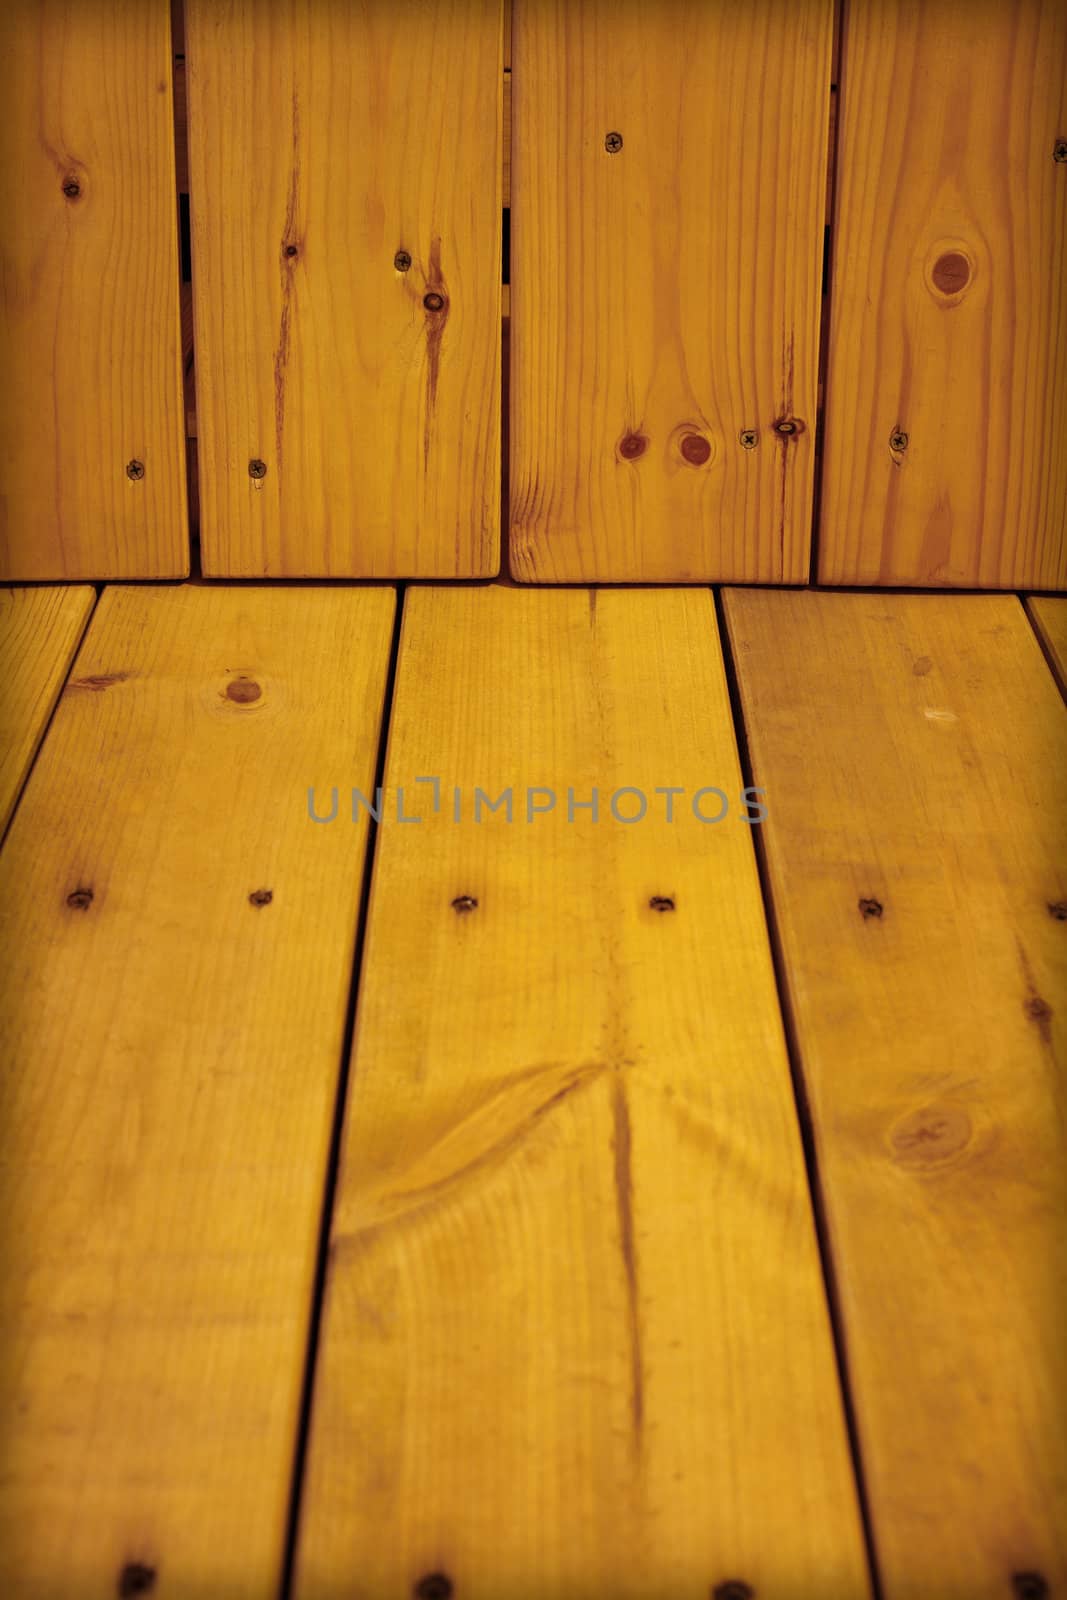 Wooden wall and floor close up - a natural background